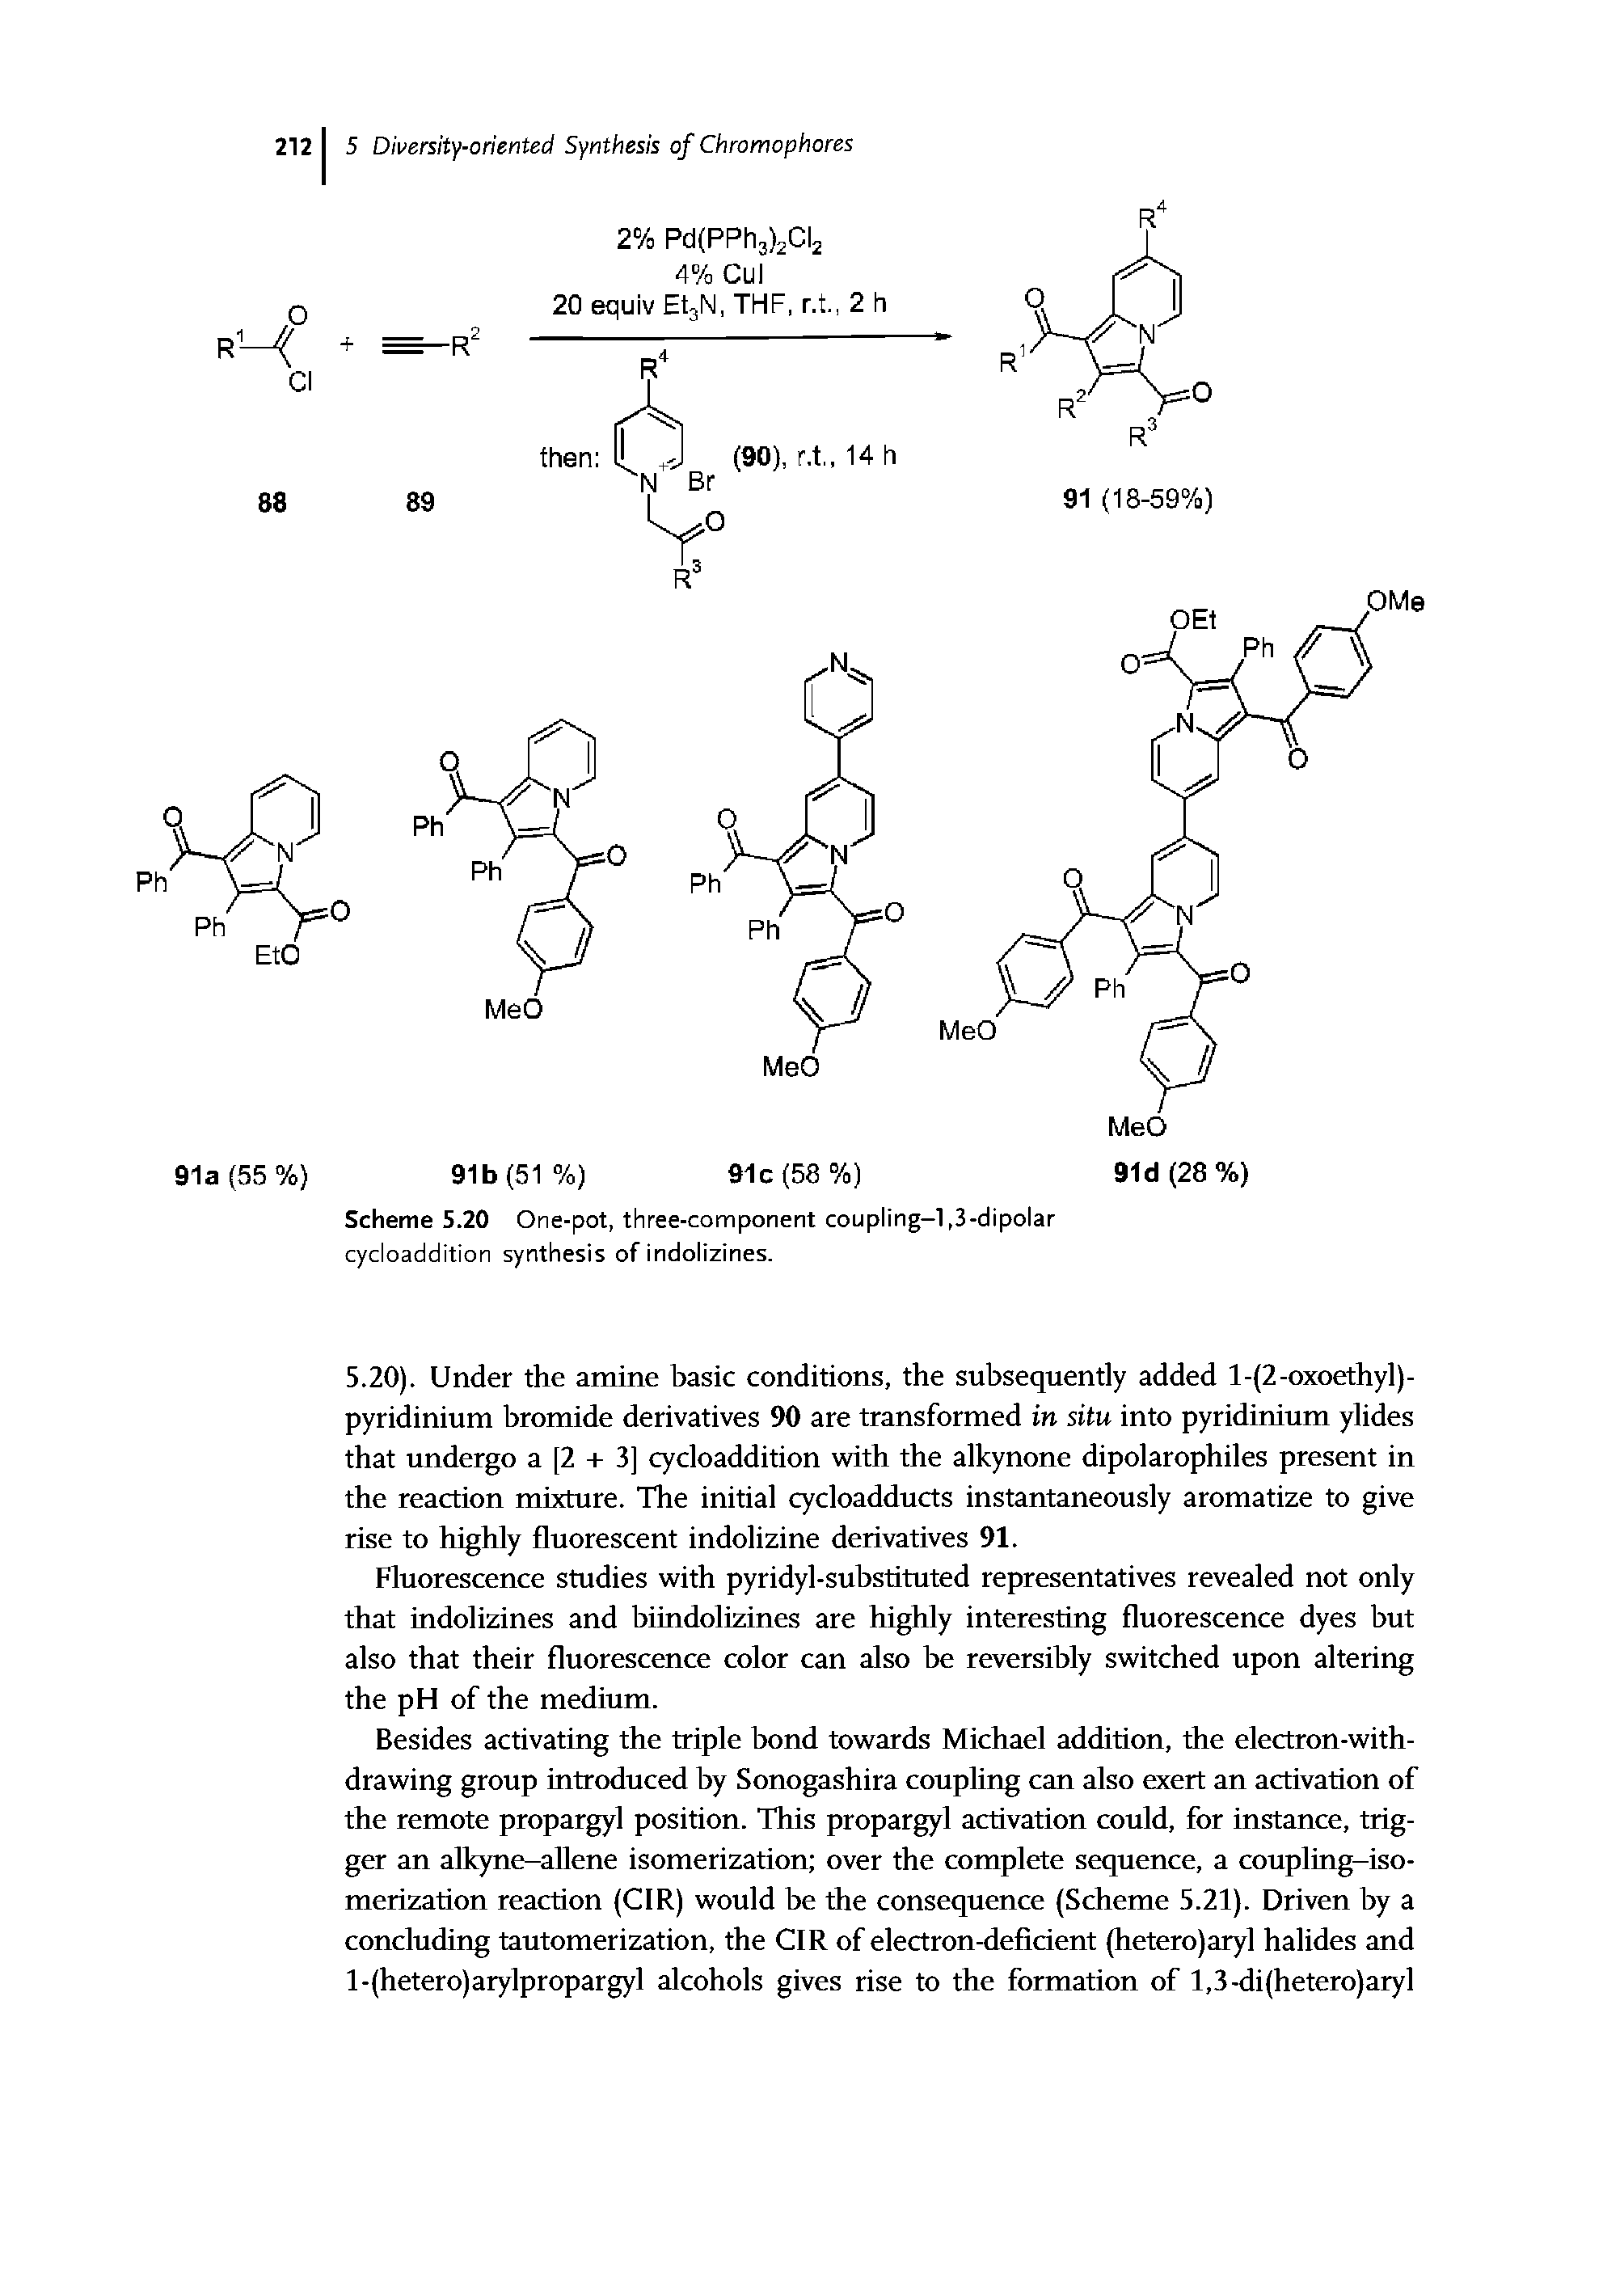 Scheme 5.20 One-pot, three-component coupling-1,3-dipolar cycloaddition synthesis of indolizines.